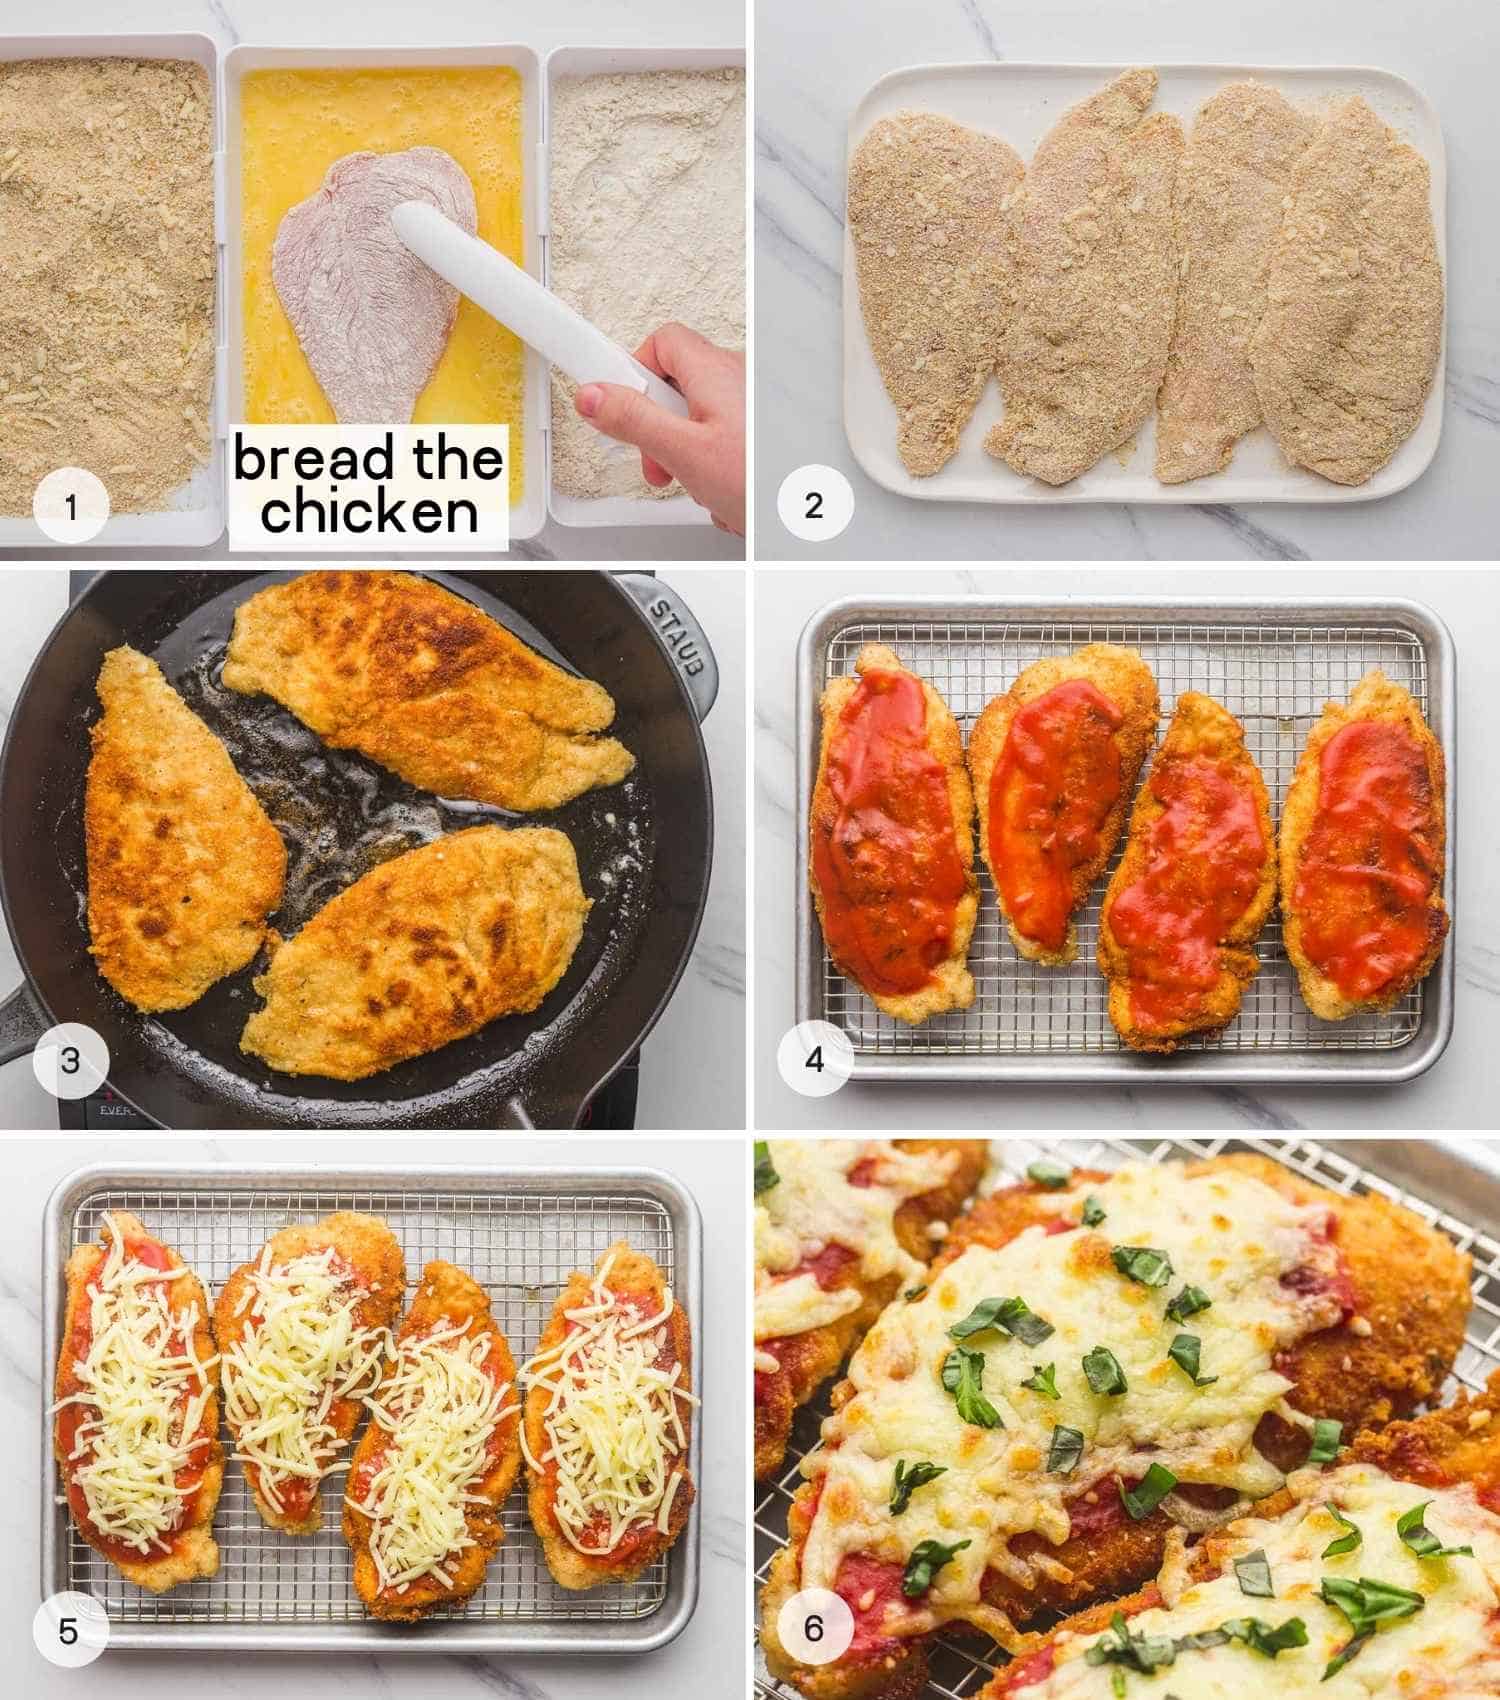 A collage with 6 images on how to bread chicken, fry it, and make chicken parmesan.